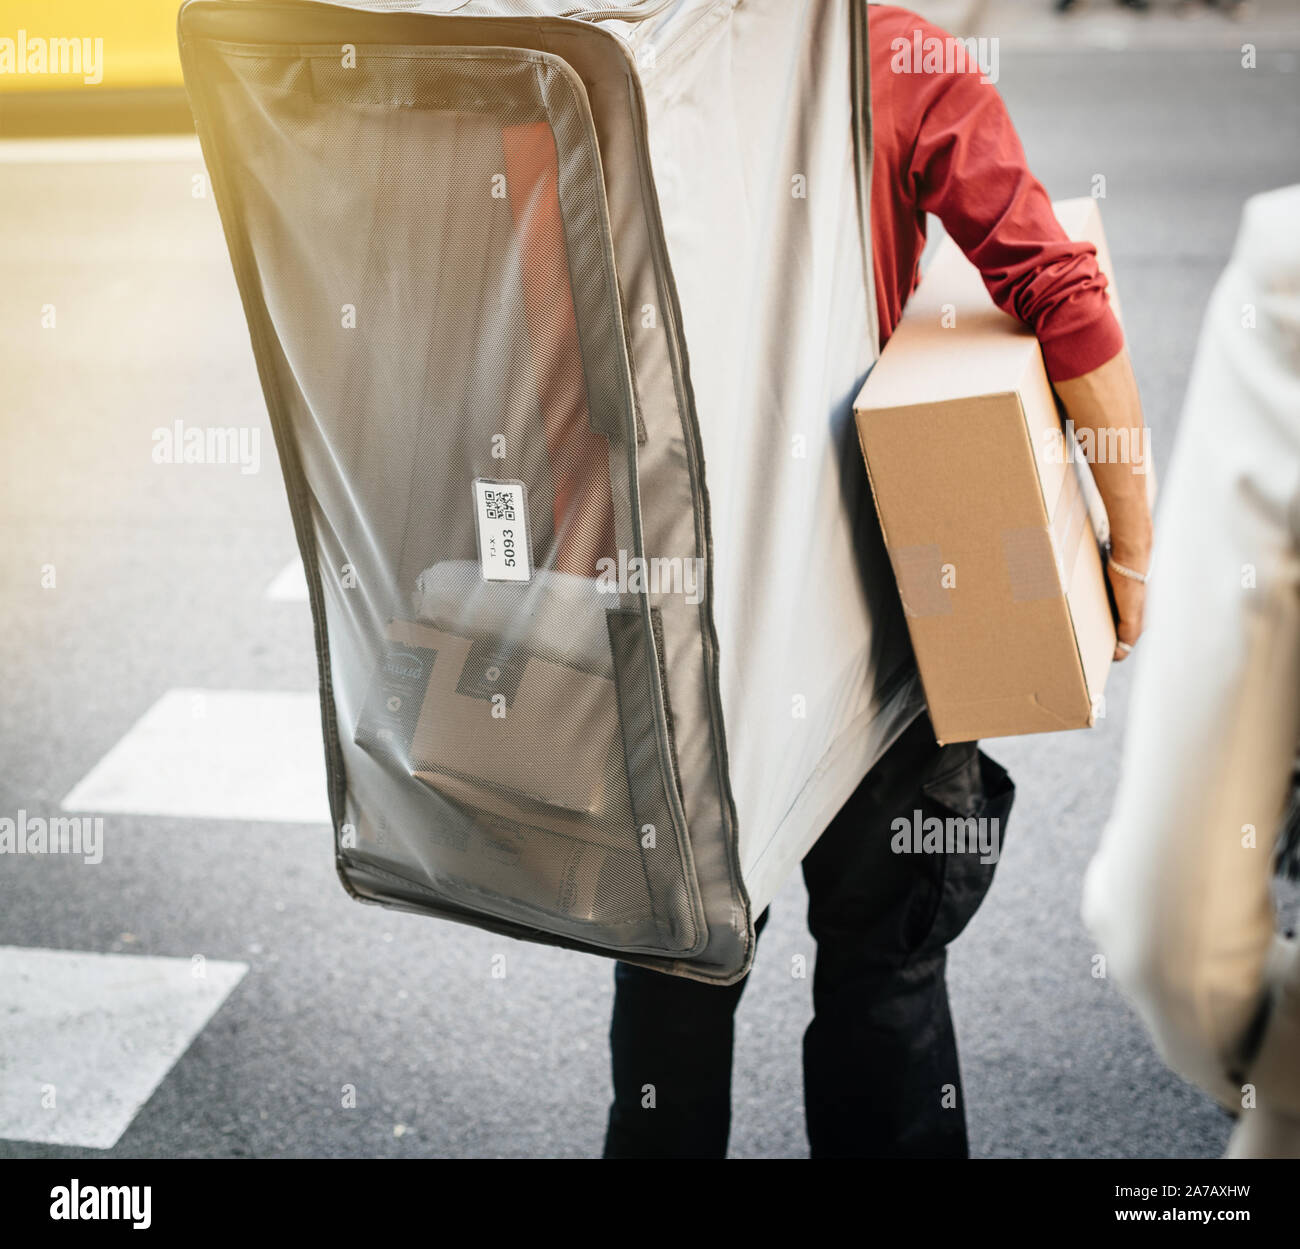 Amazon Packages High Resolution Stock Photography and Images - Alamy